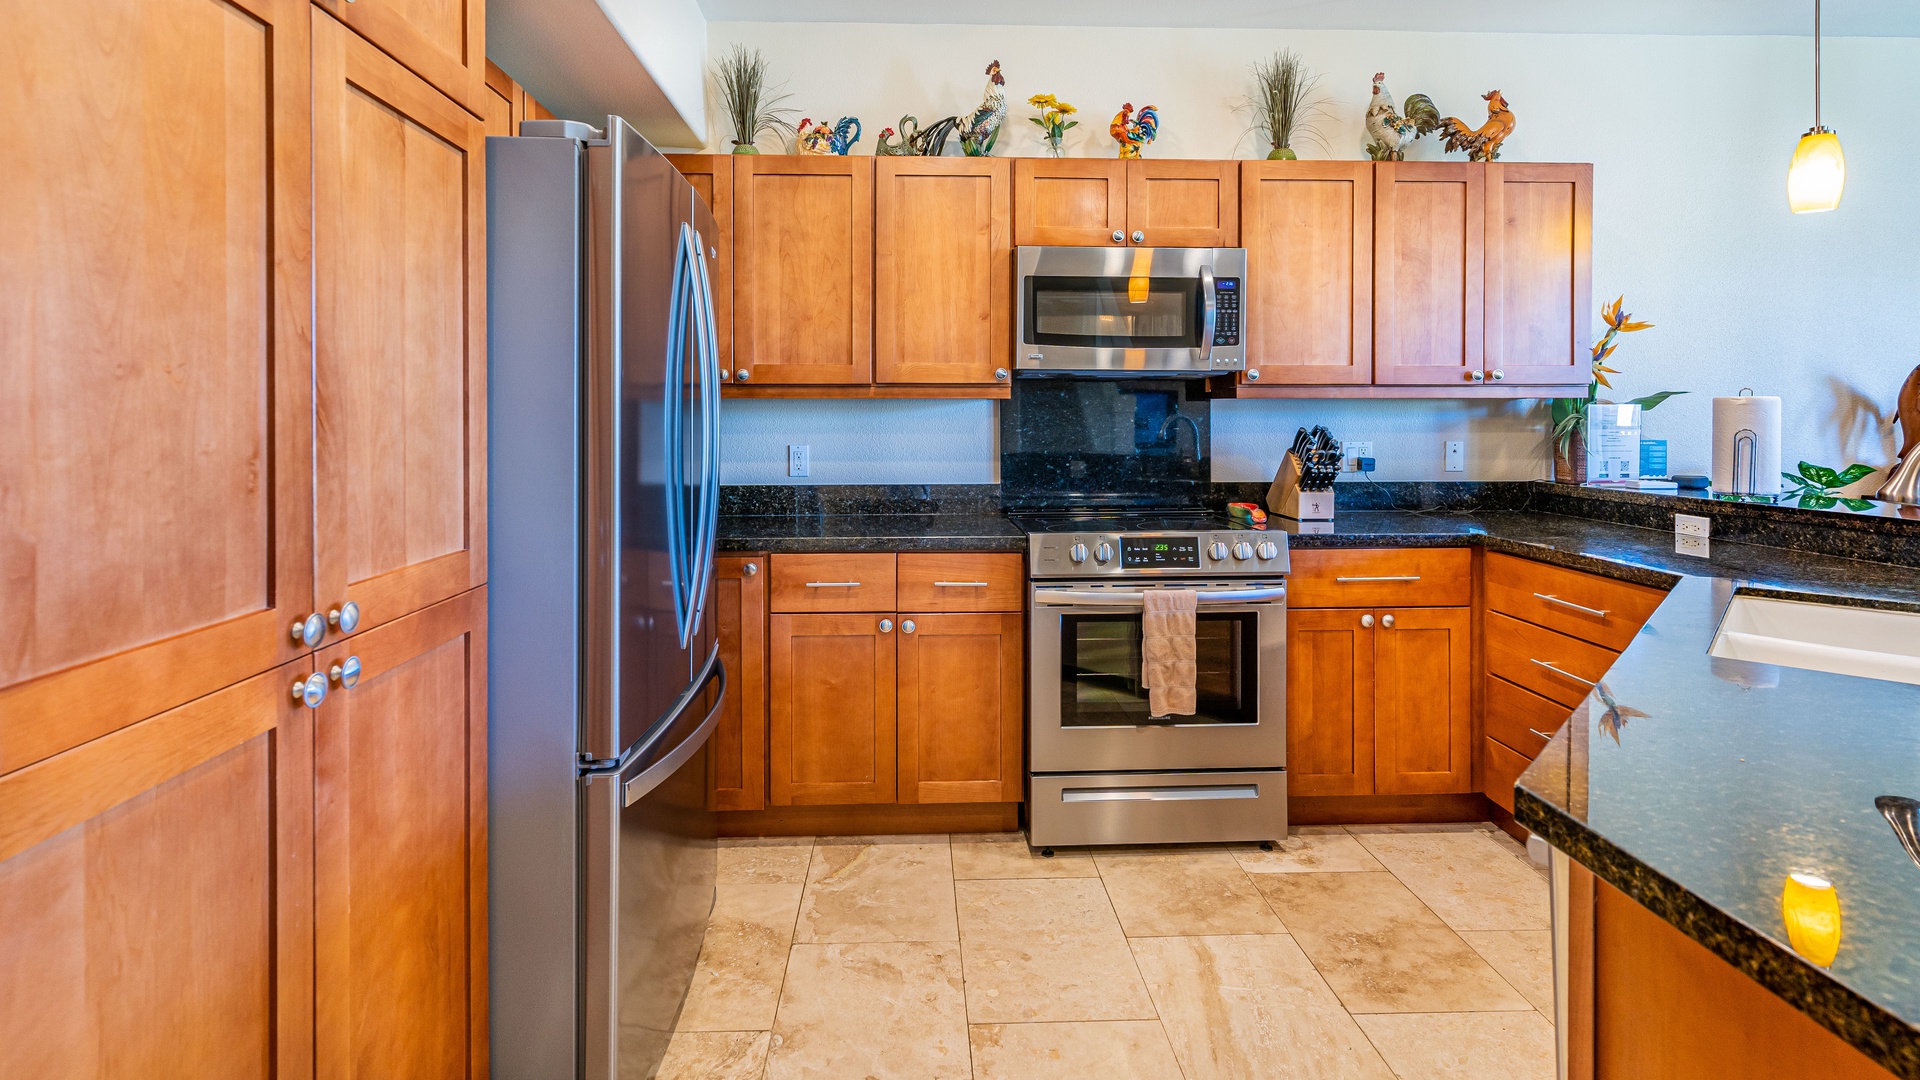 Kapolei Vacation Rentals, Ko Olina Kai 1033C - The kitchen also offers an induction cooktop for all your culinary adventures.